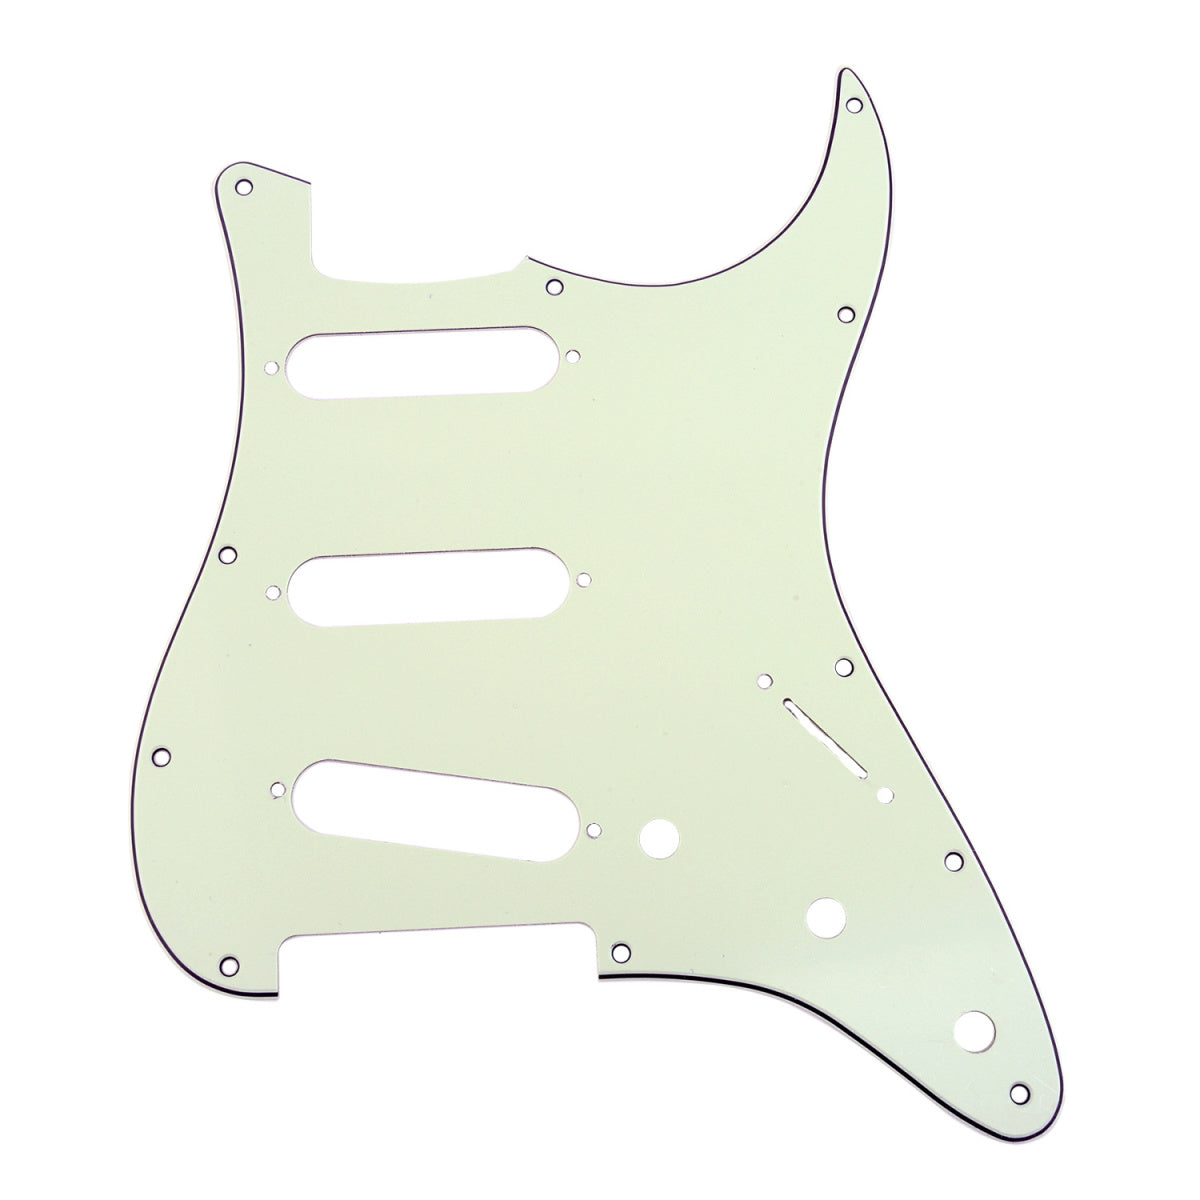 Musiclily SSS 11 Hole Strat Guitar Pickguard for Fender USA/Mexican Made Standard Stratocaster Modern Style, 3Ply Ivory